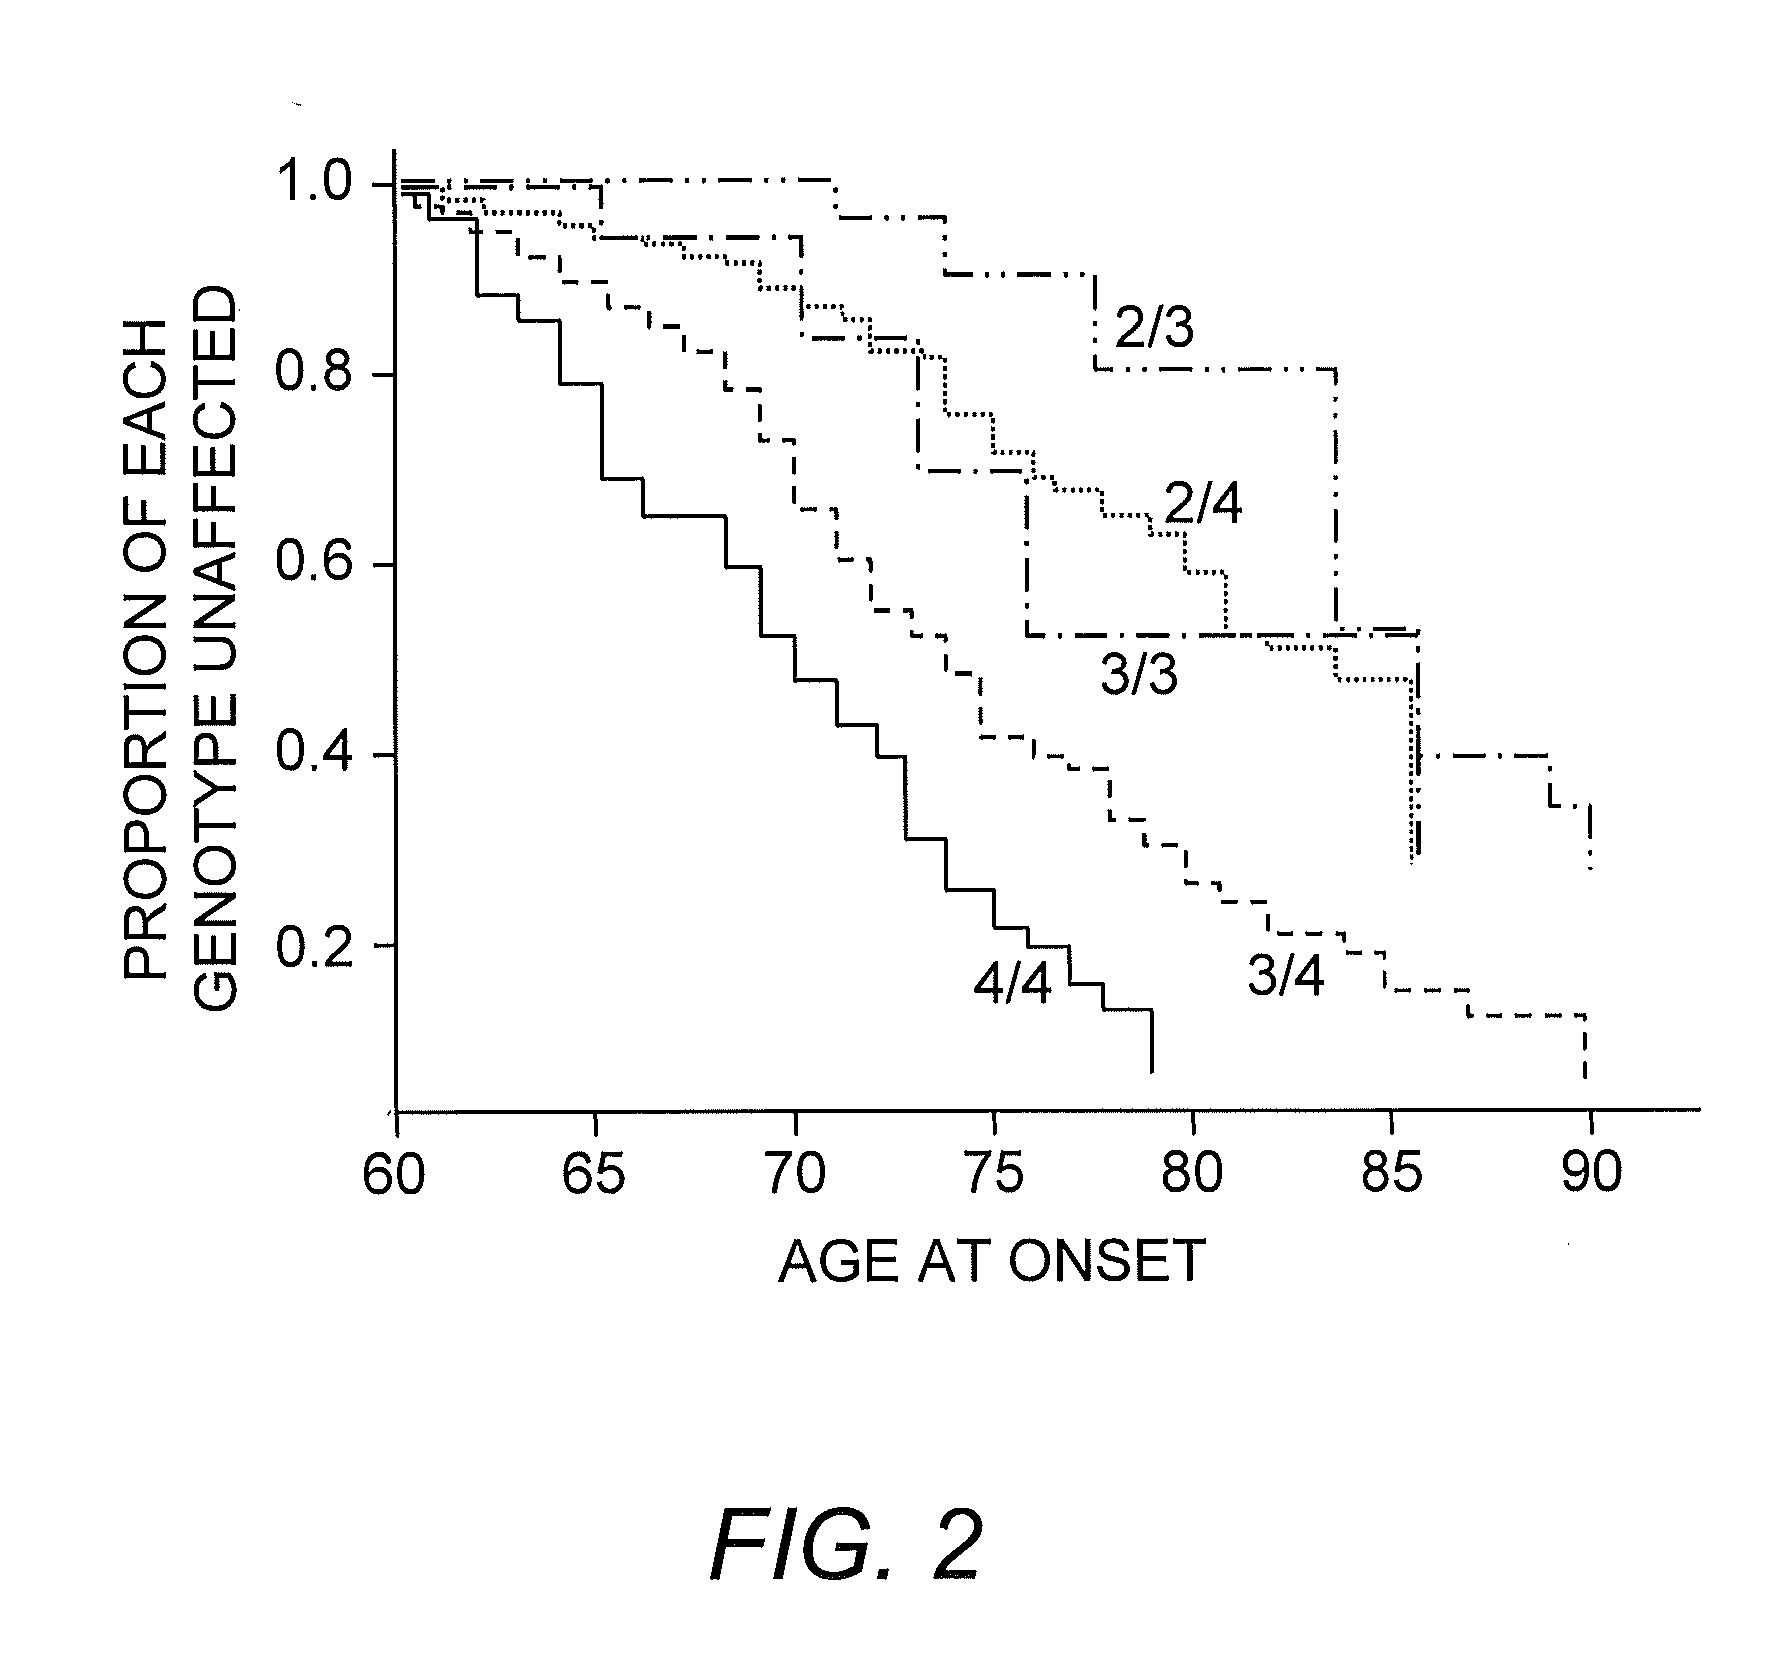 Disease risk factors and methods of use